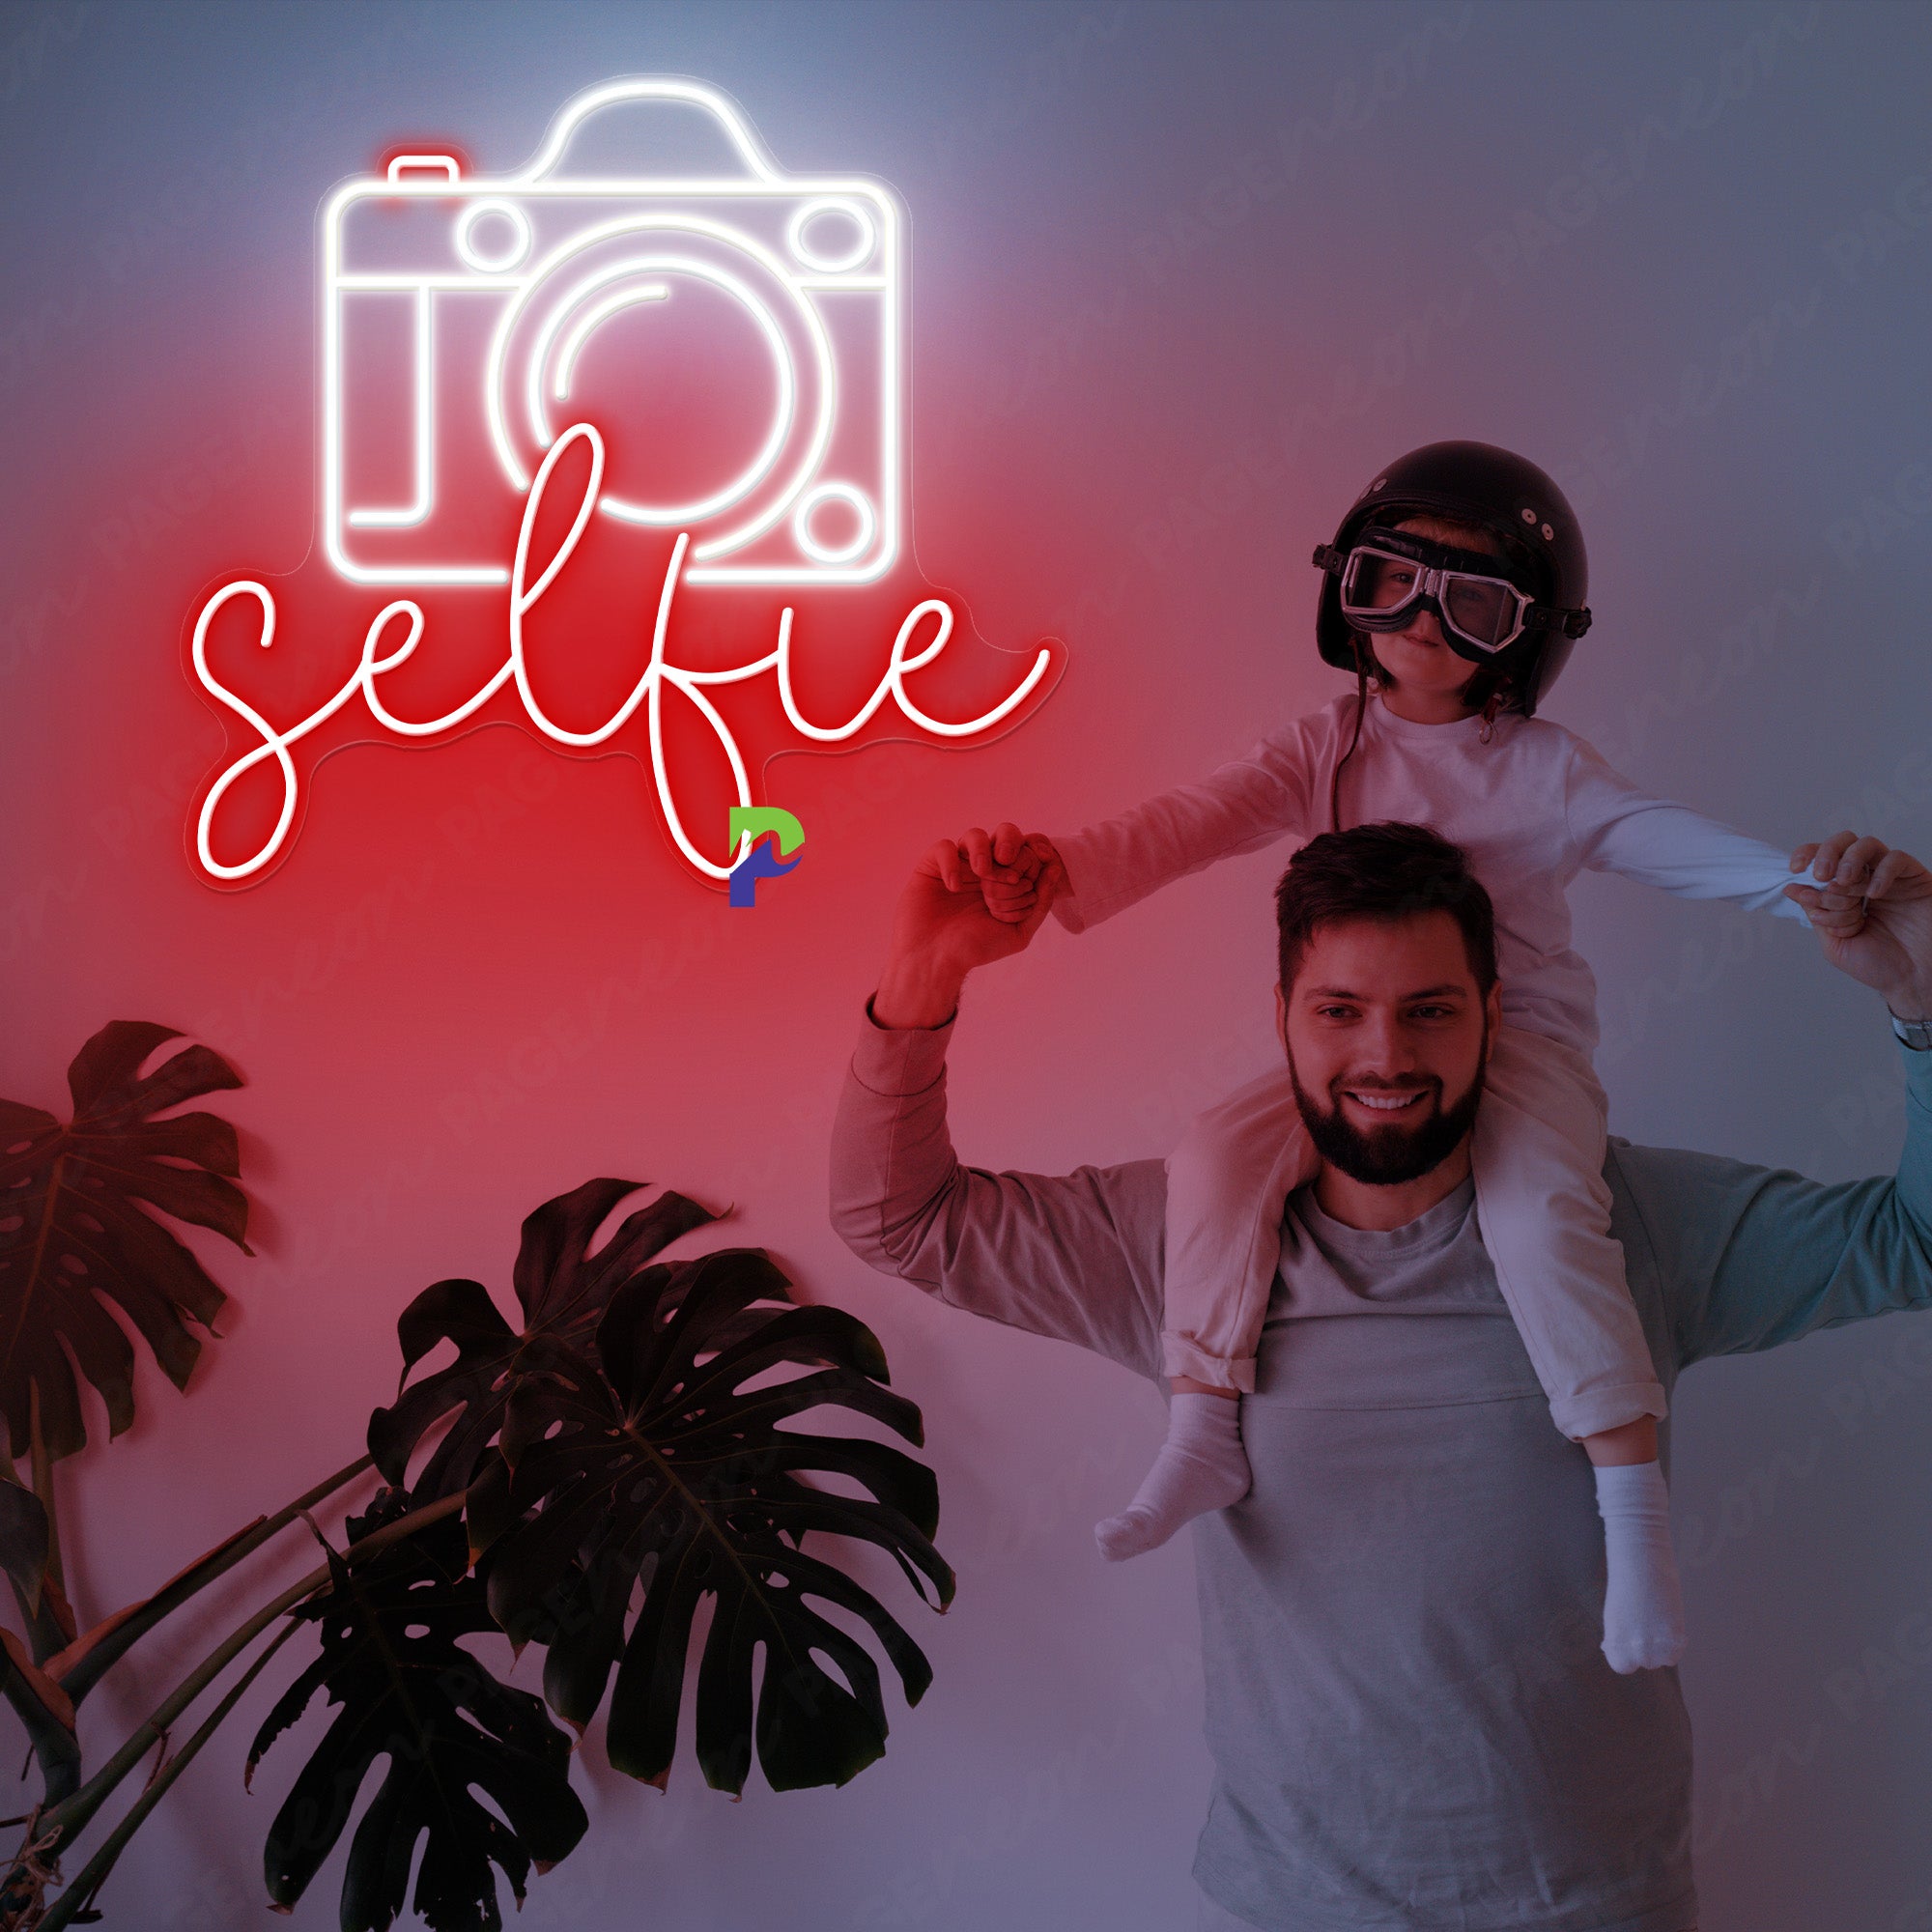 Selfie Neon Sign Party Led Light red